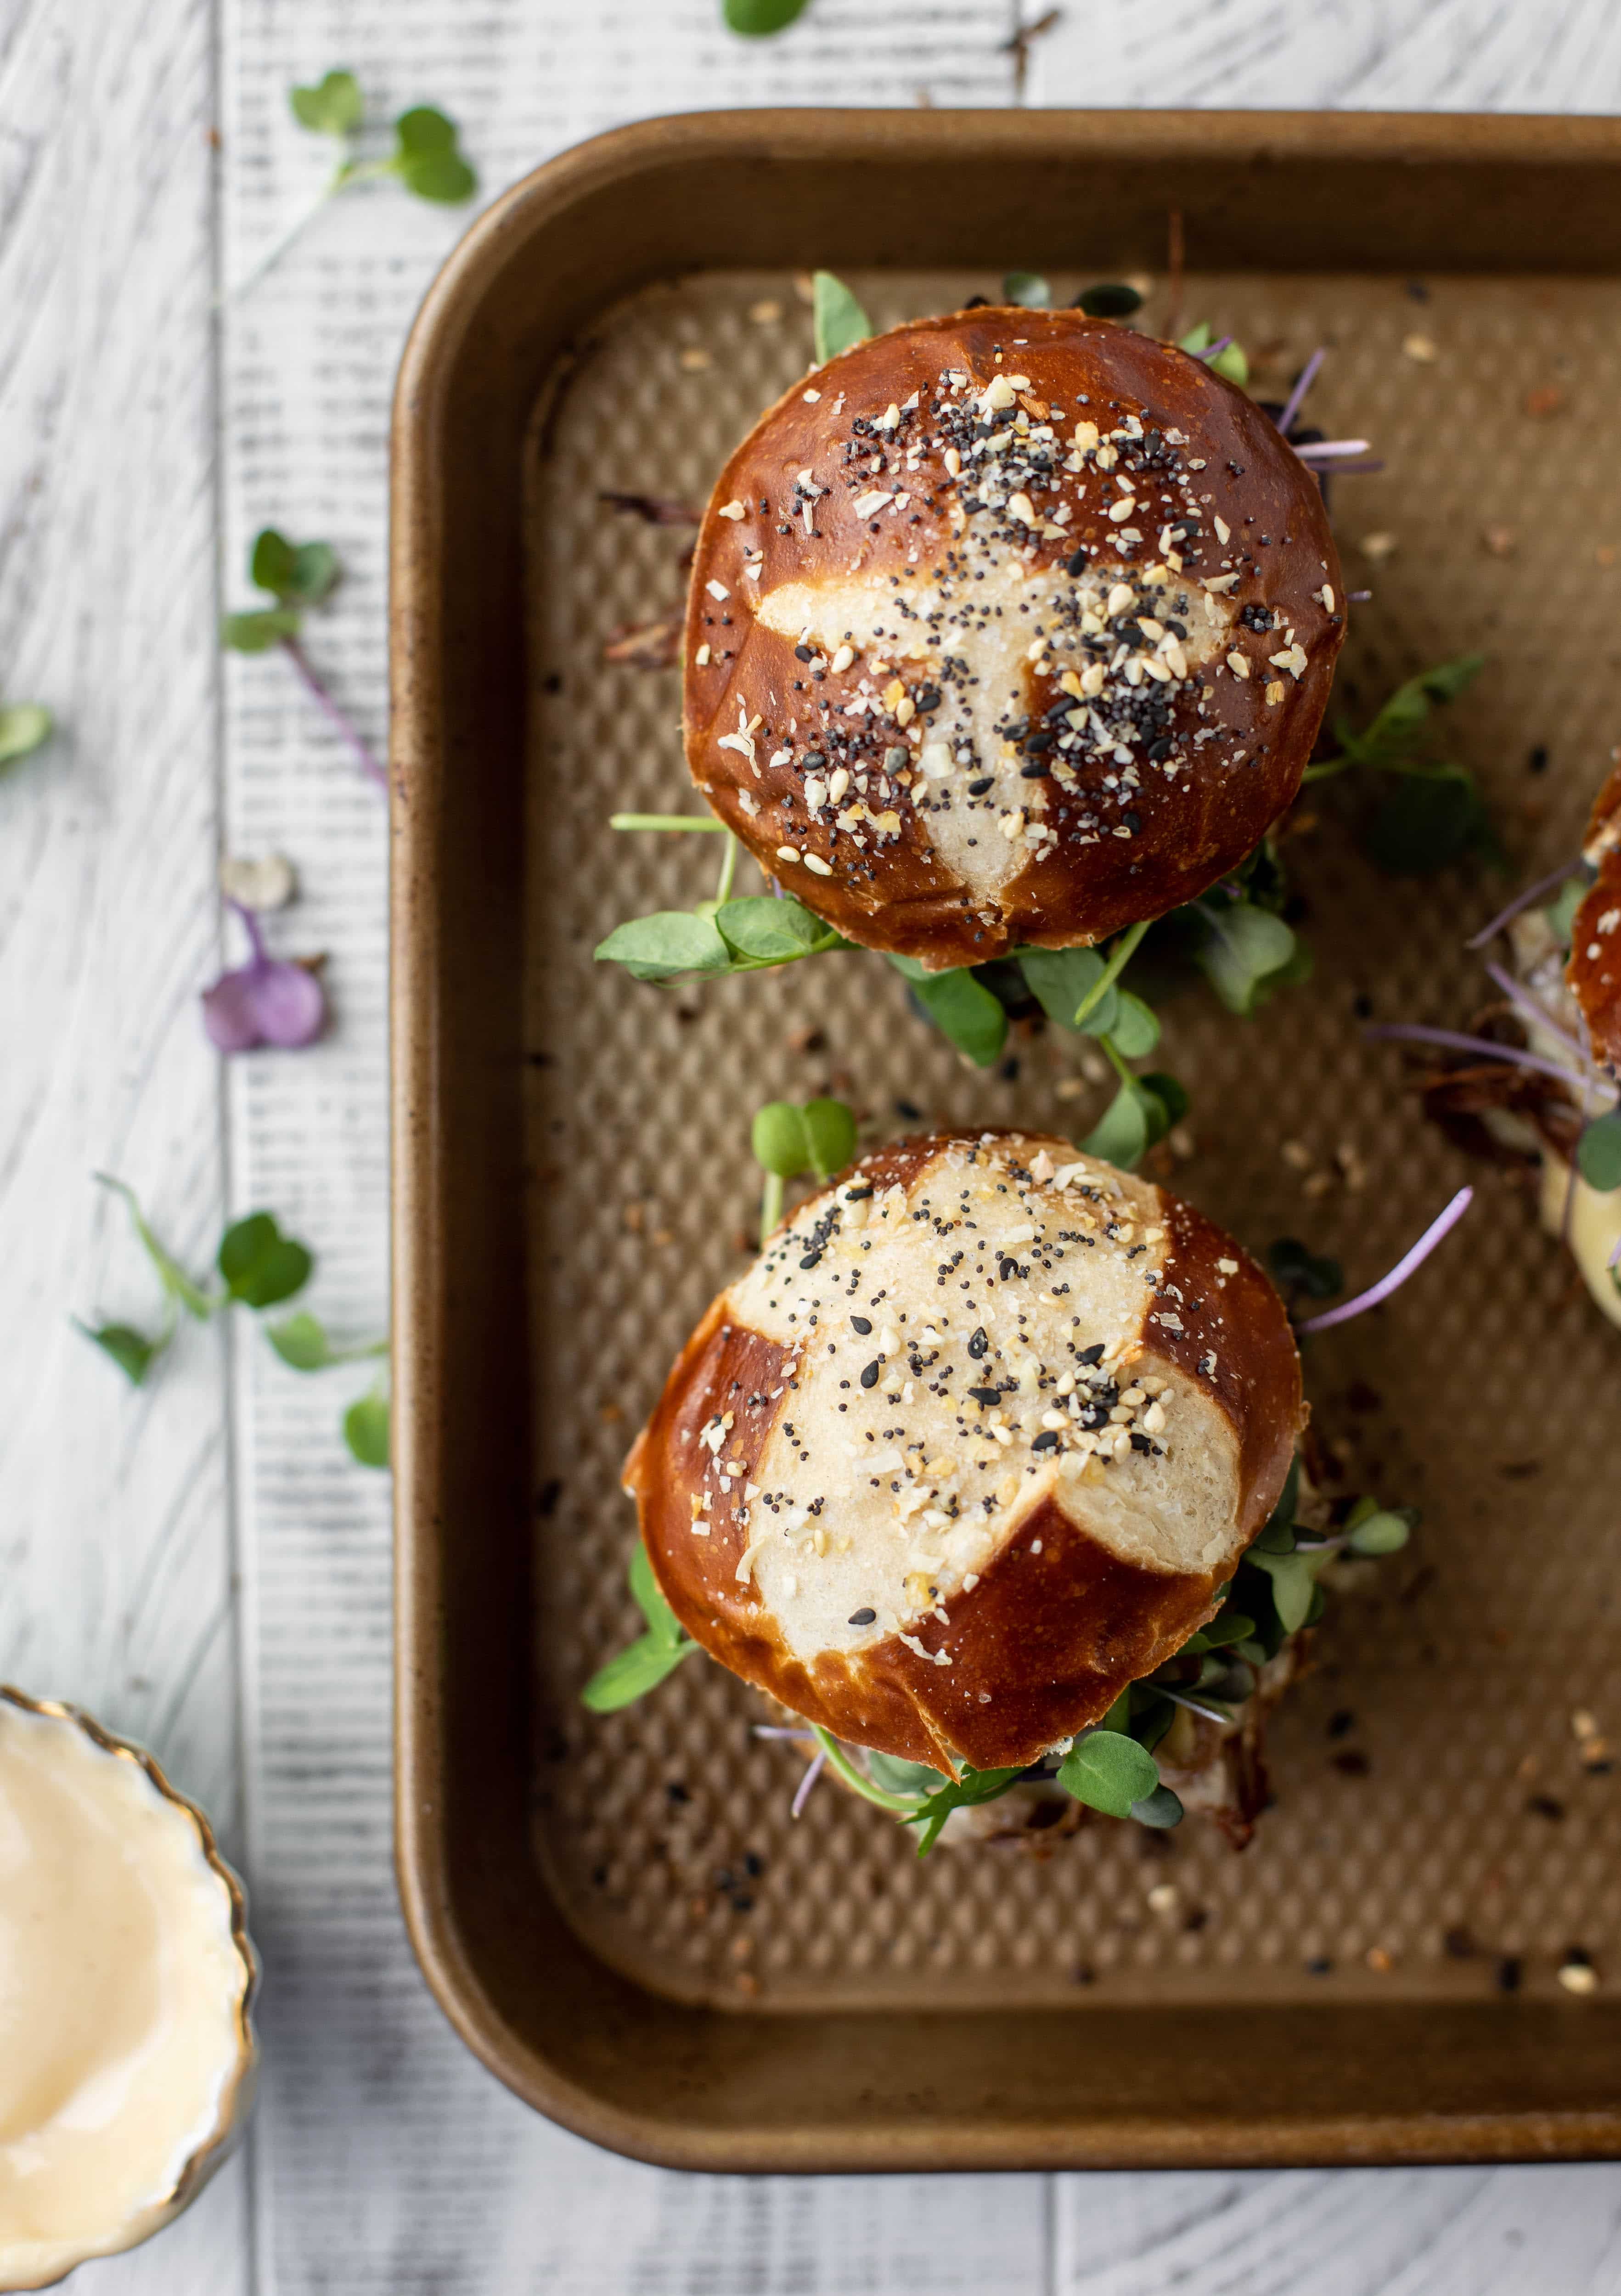 This pumpkin beer brisket melts are smothered in havarti cheese and served on everything pretzel rolls. They are ridiculously delicious!